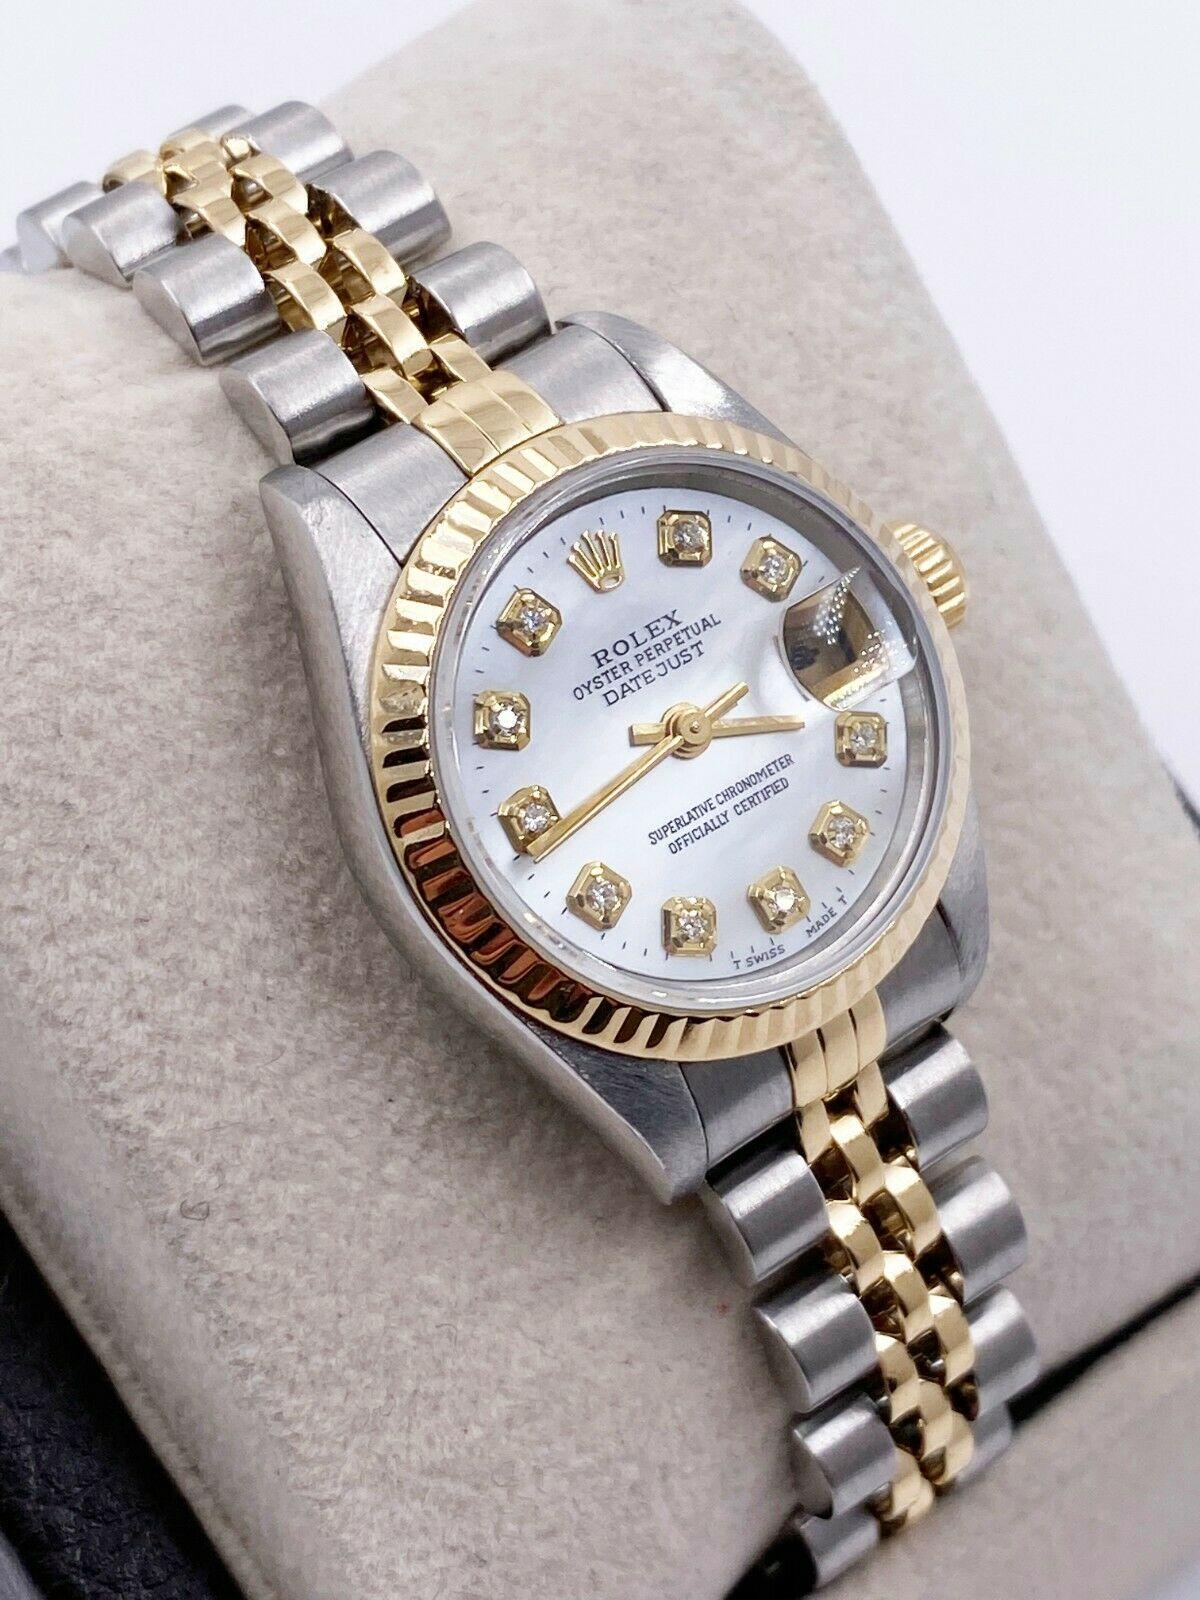 Style Number: 69173

 

Serial: T327***

 

Model: Datejust 

 

Case Material: Stainless Steel

 

Band: 18K Yellow Gold & Stainless Steel

 

Bezel:  18K Yellow Gold

 

Dial: Custom MOP Diamond Dial

 

Face: Sapphire Crystal

 

Case Size: